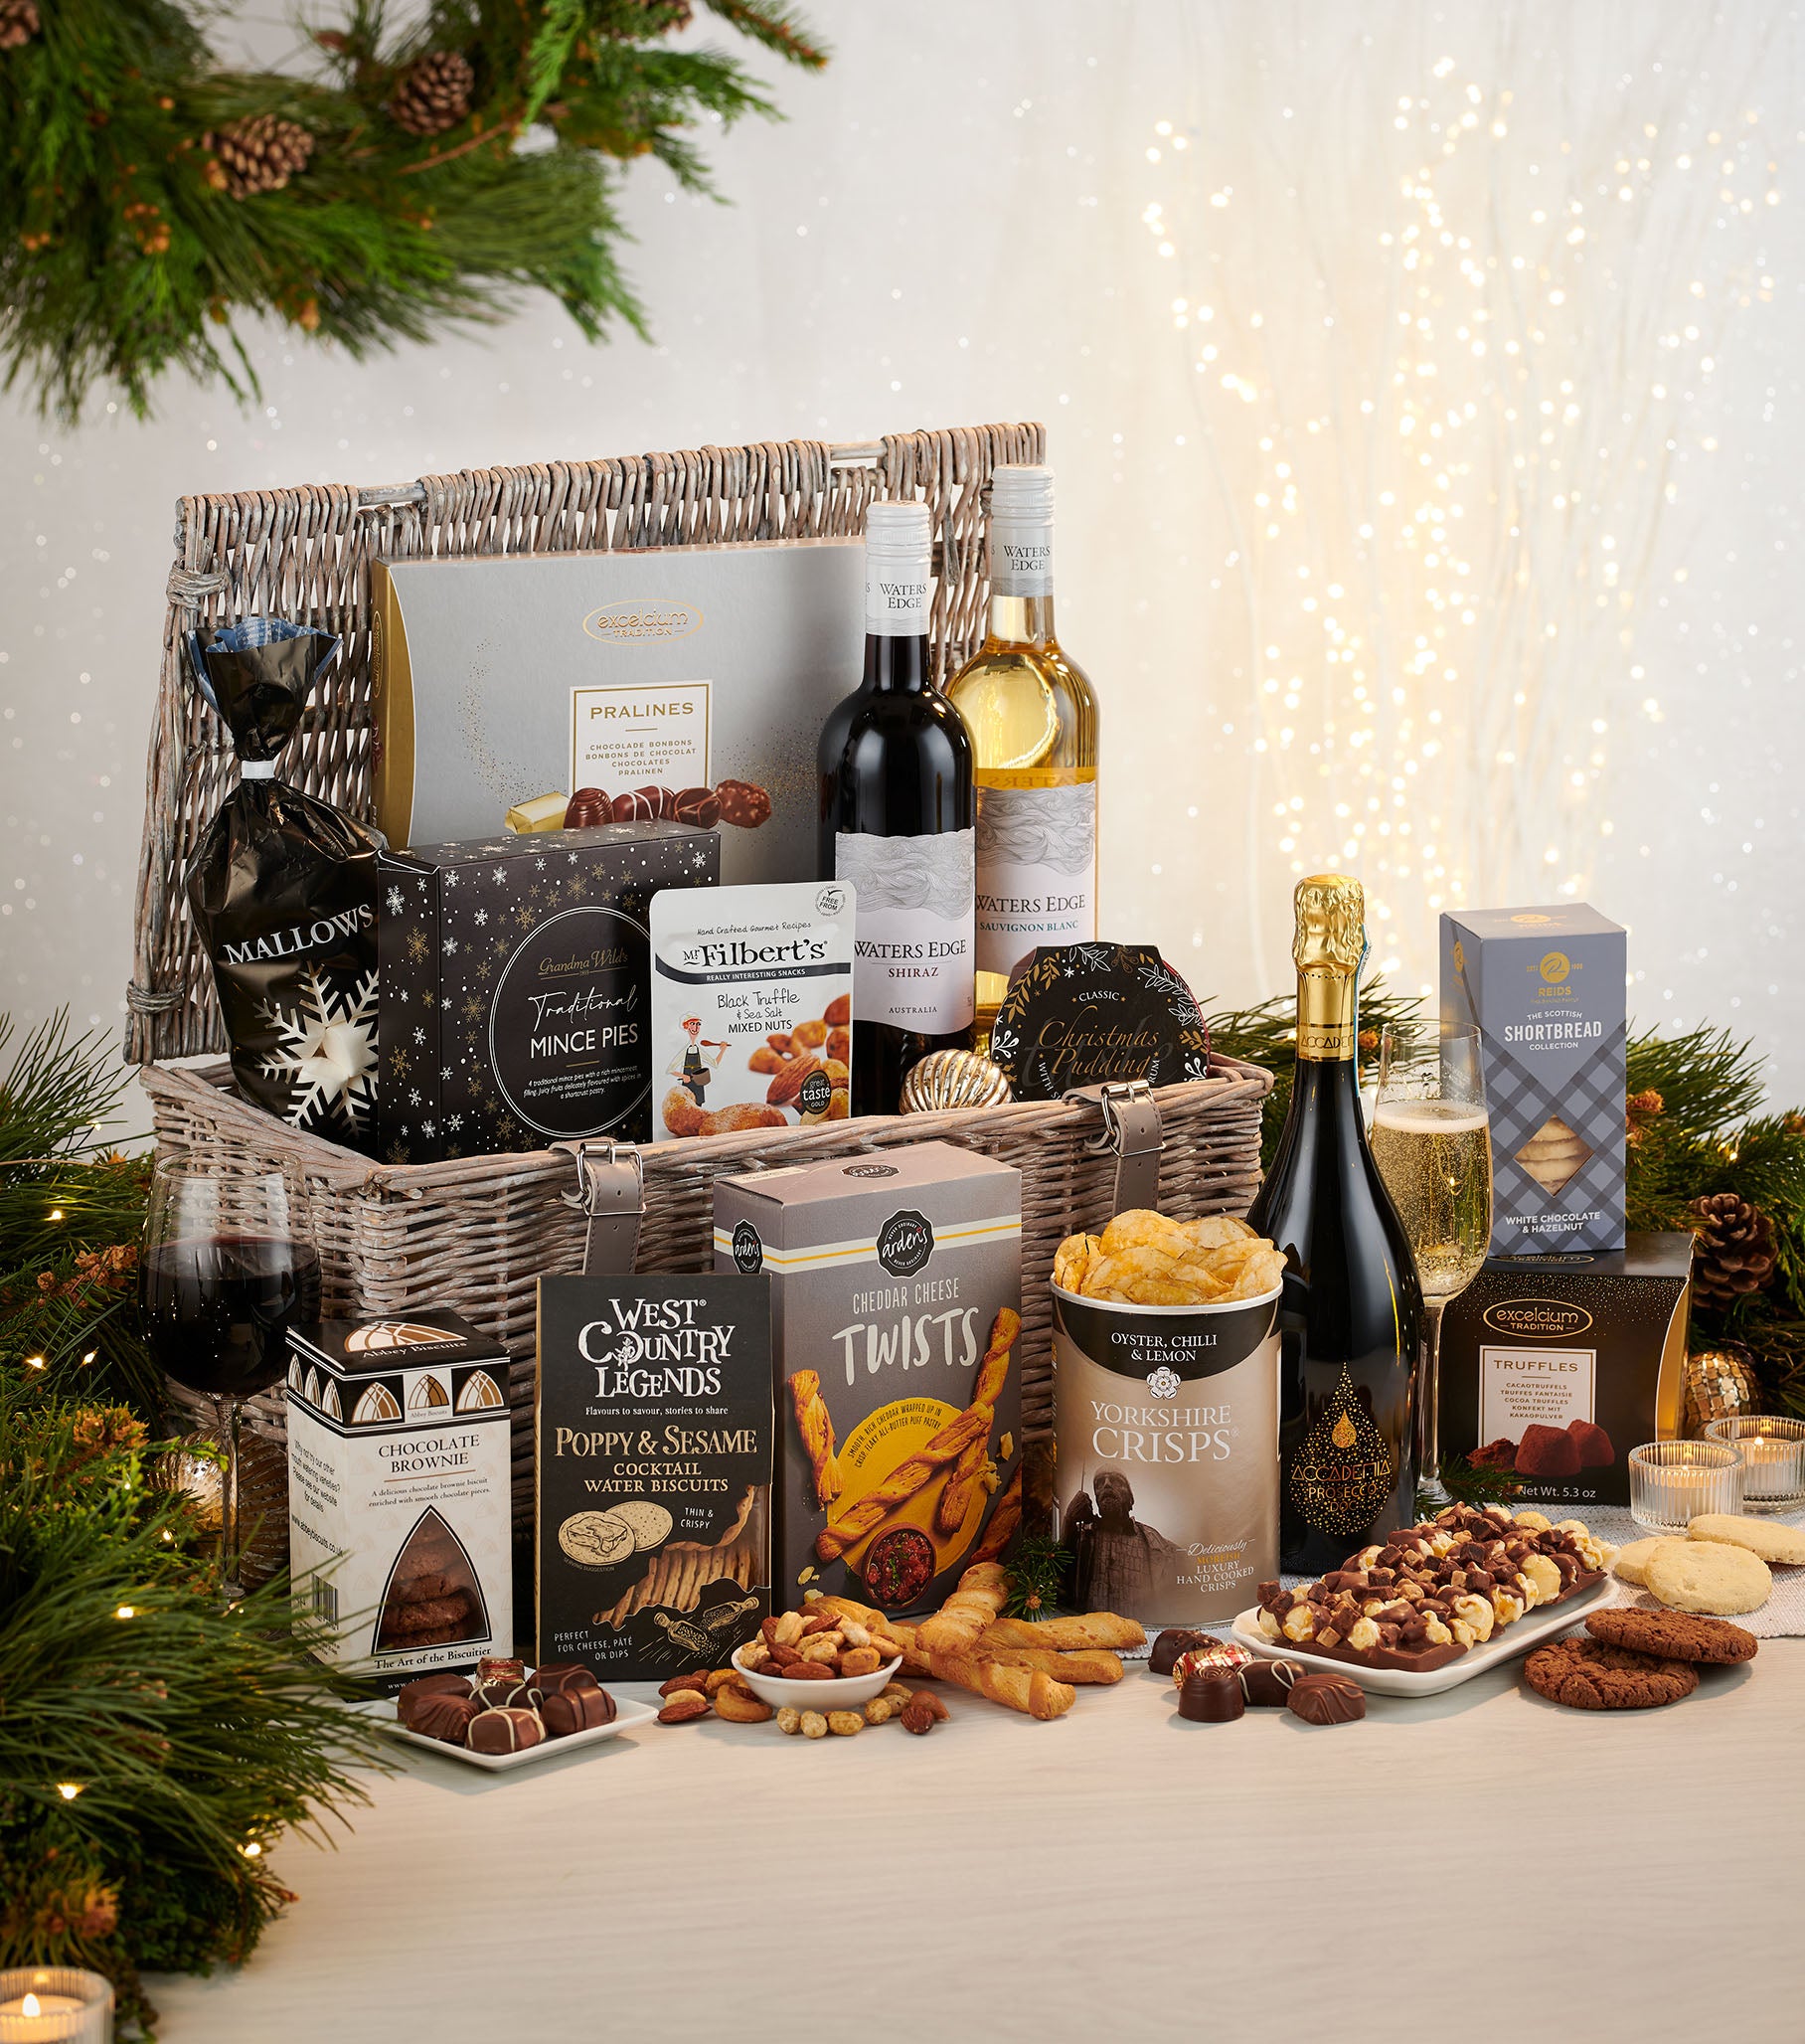 Spicers of Hythe Dig and Share Christmas Hamper